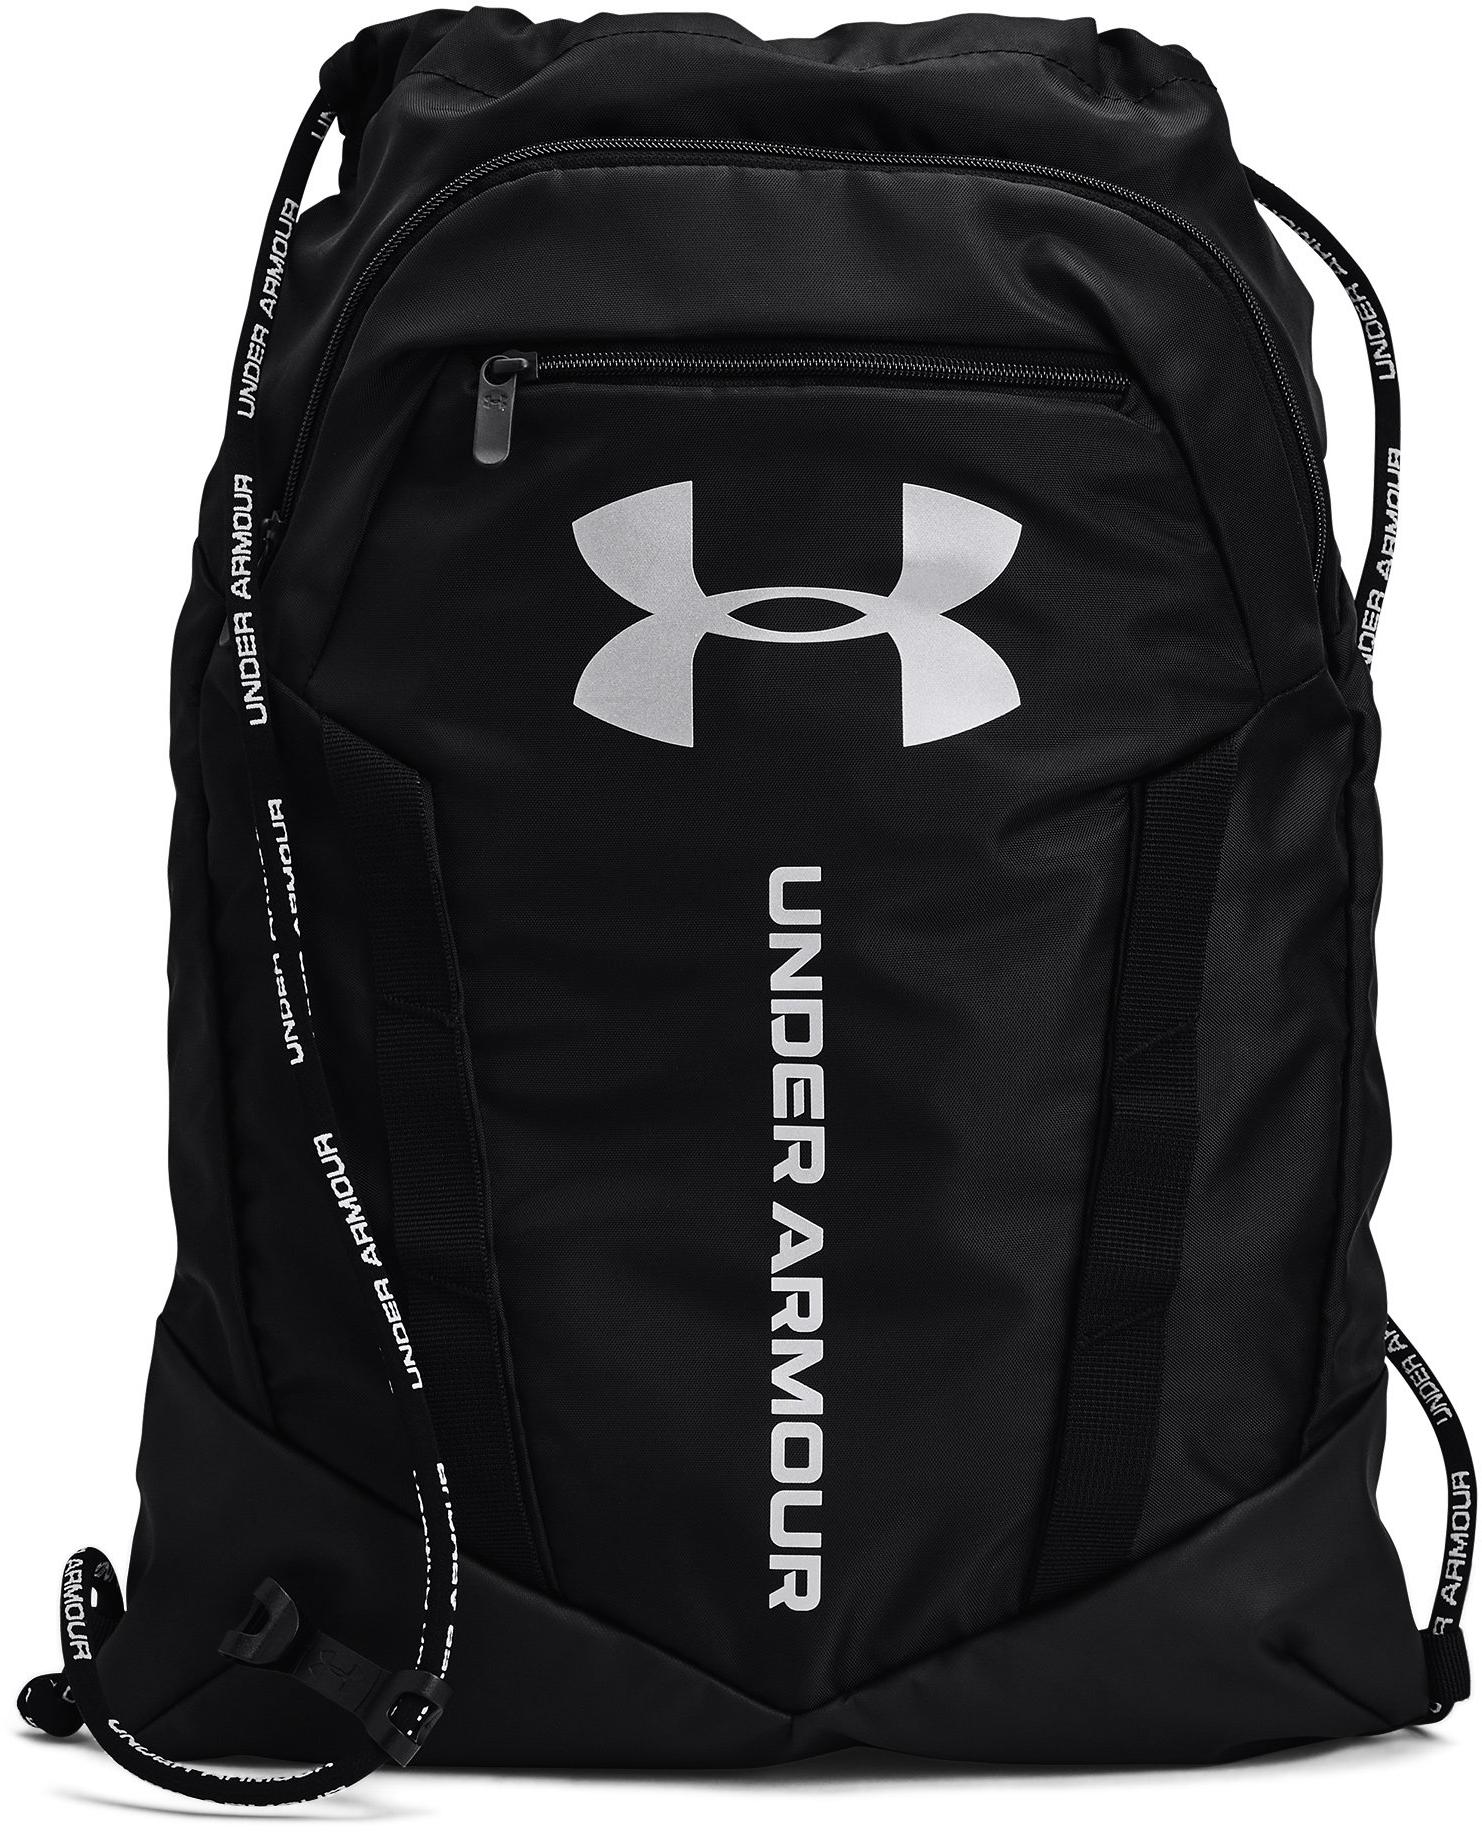 Under Armour Undeniable Sackpack-BLK